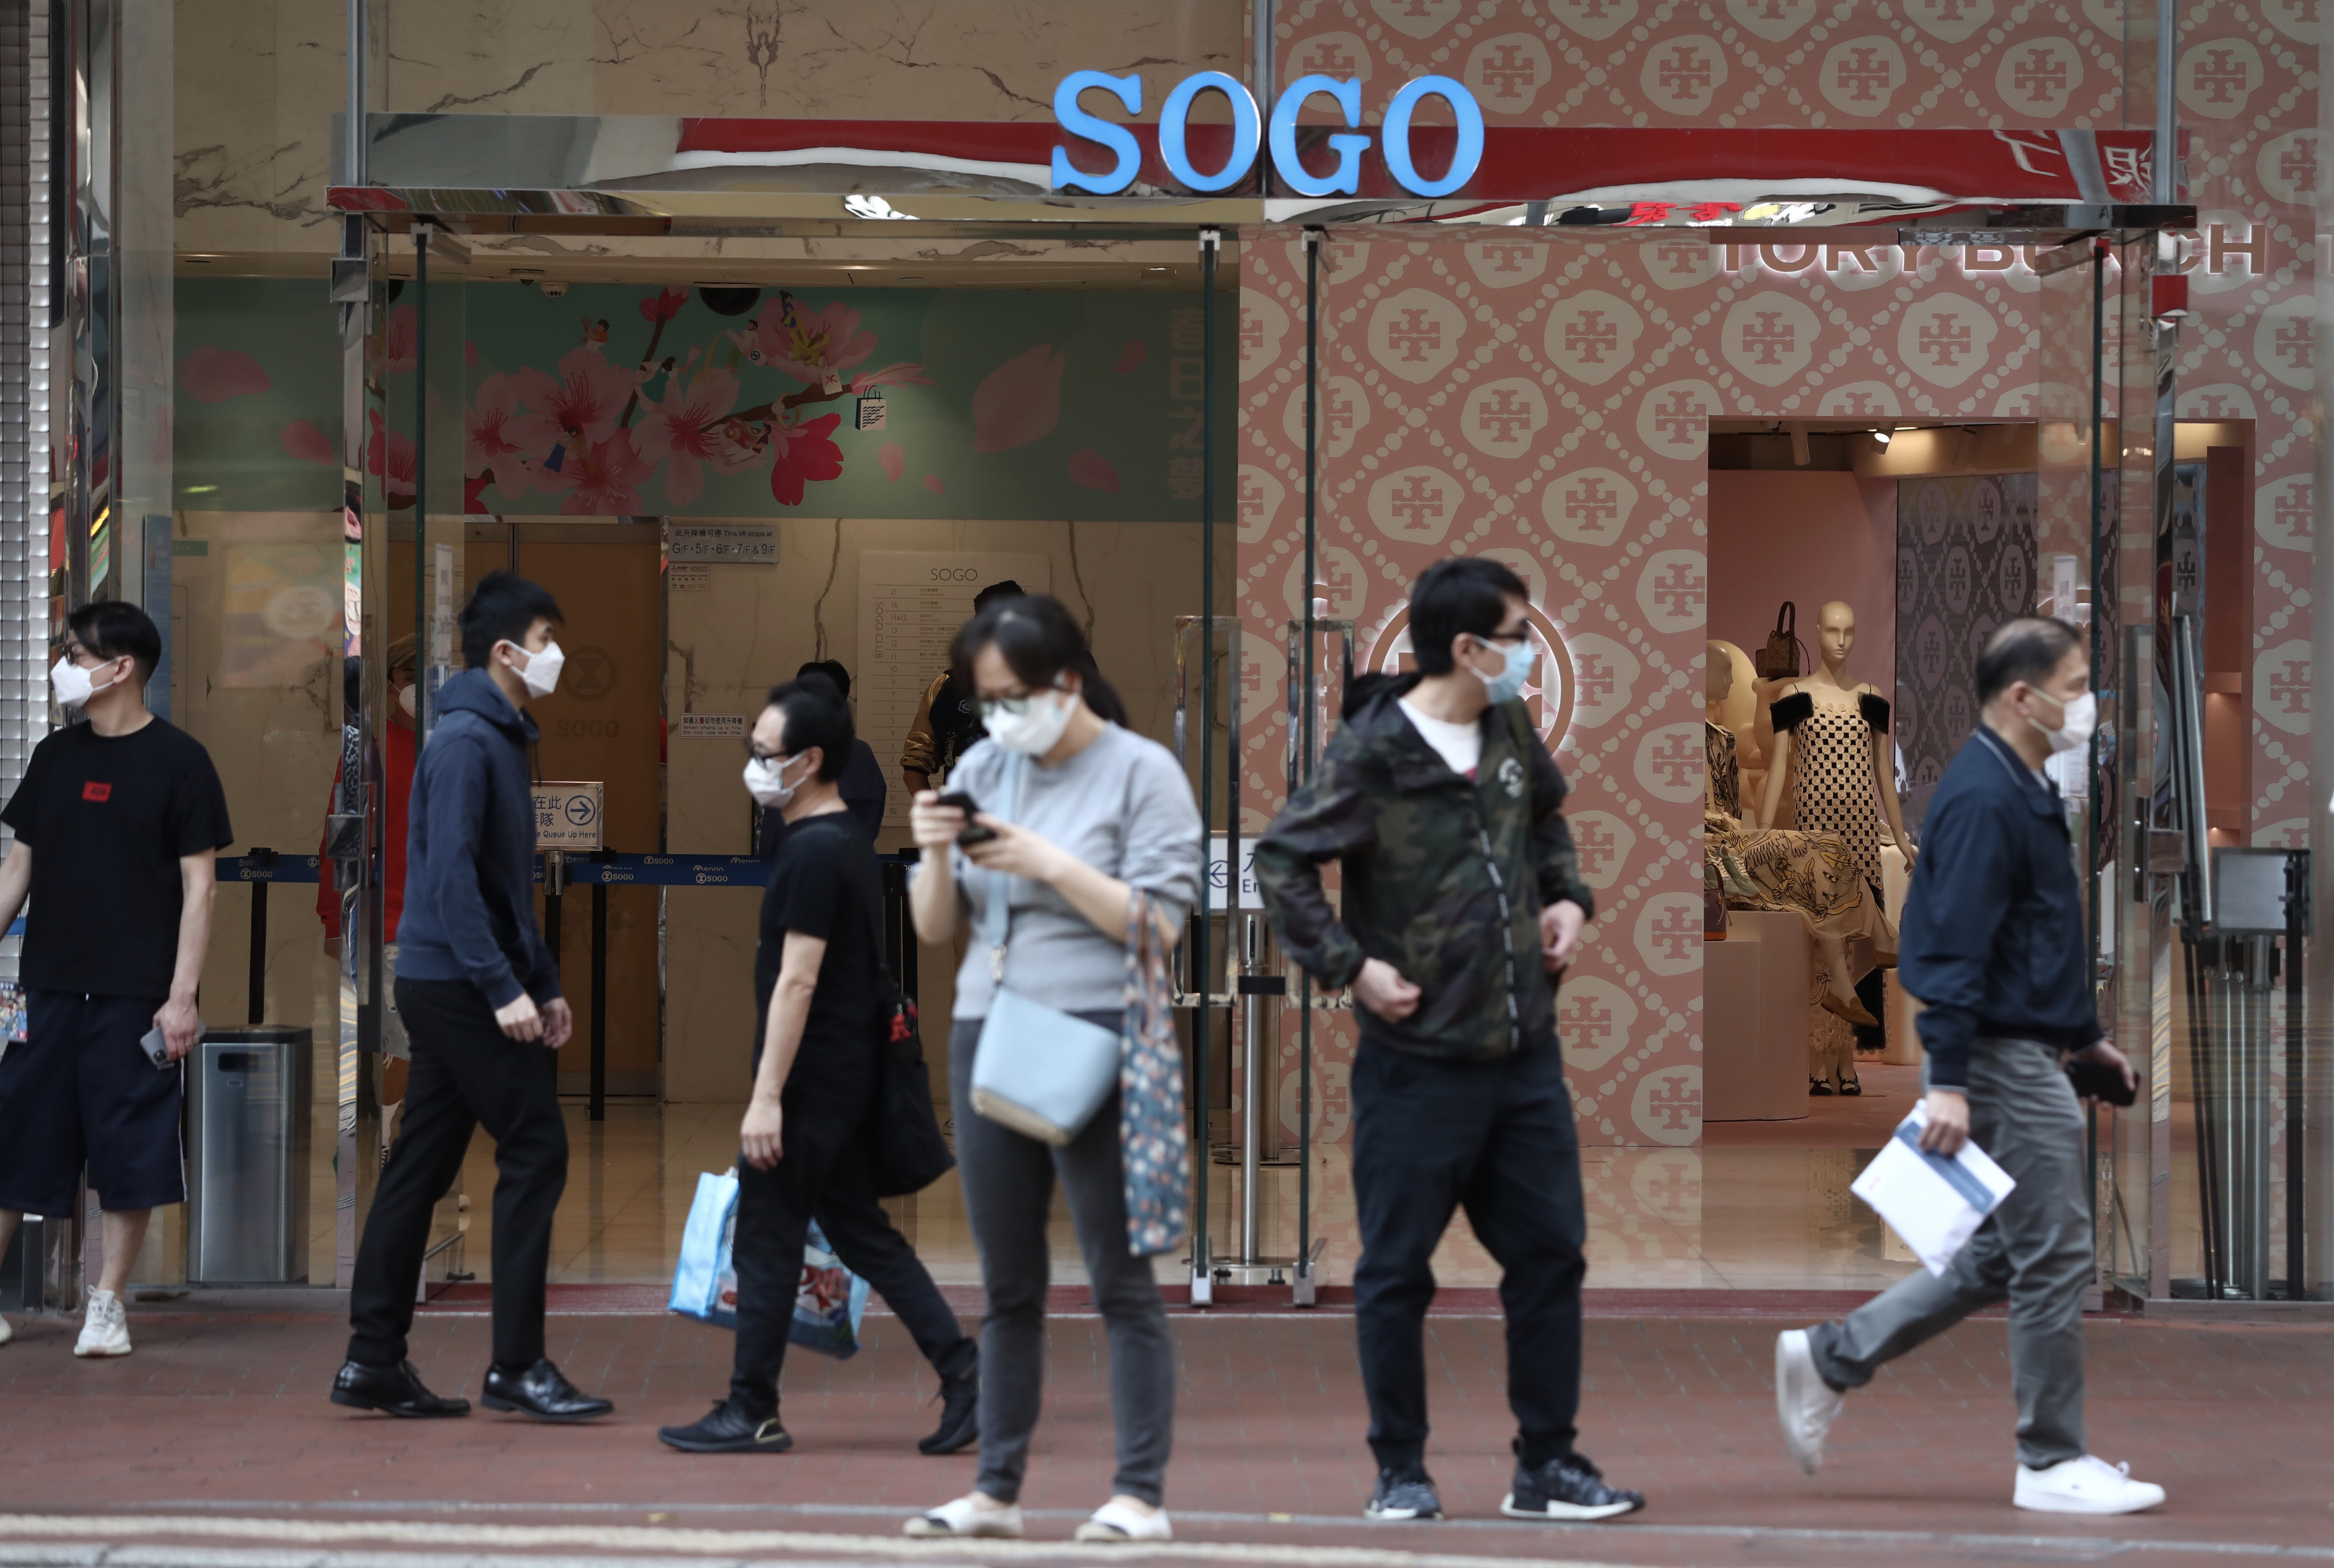 The Sogo department store in Causeway Bay. Photo: Jonathan Wong